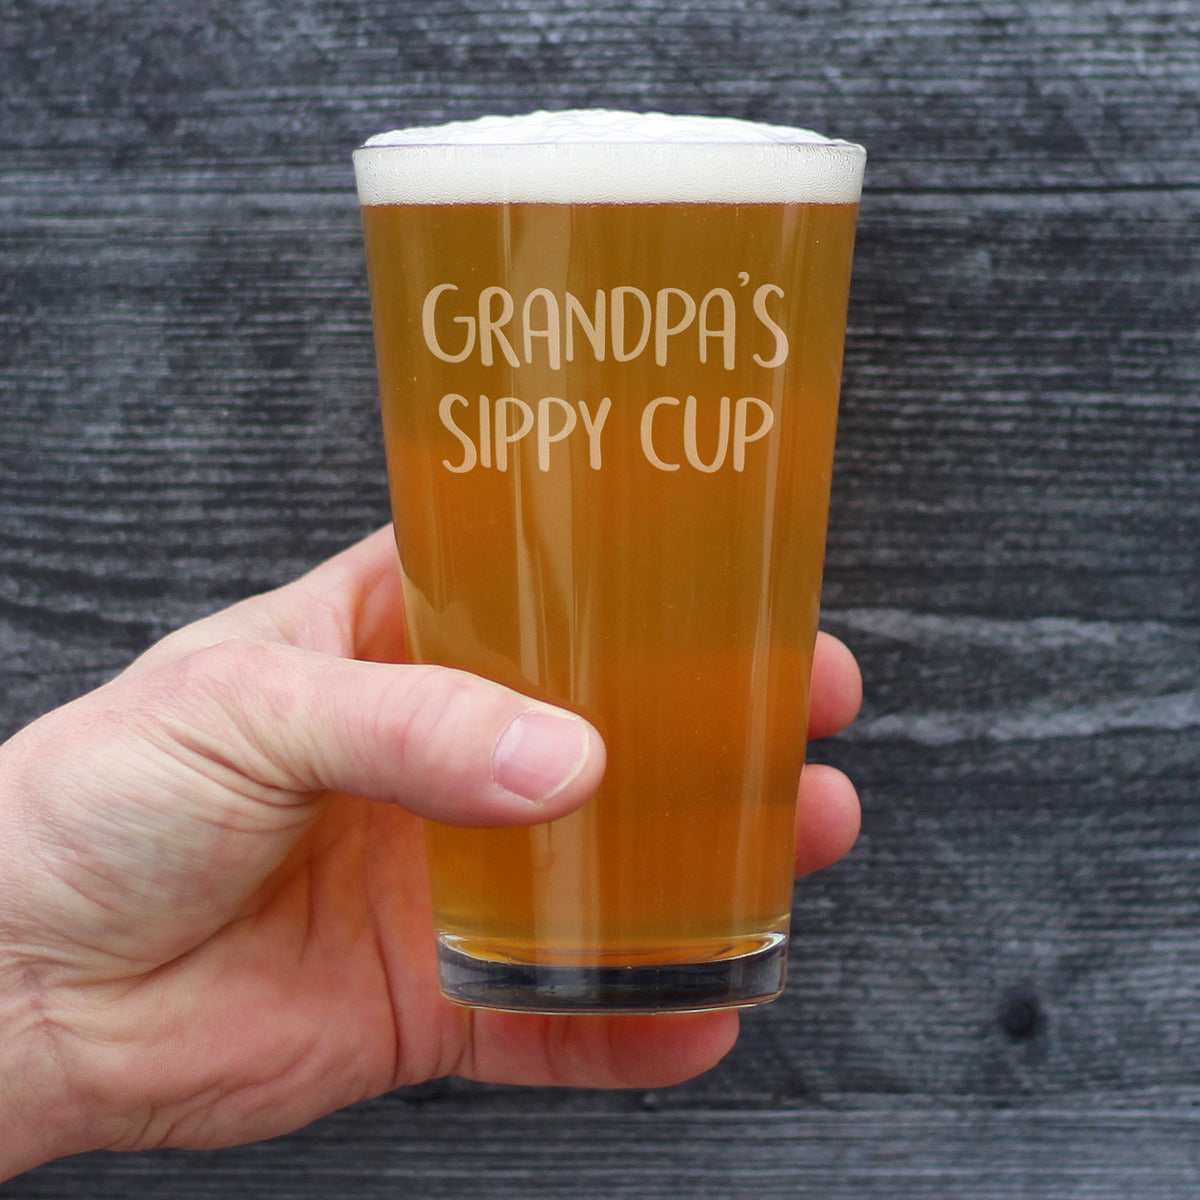 Grandpa&#39;s Sippy Cup - Funny Pint Glass Glass Gift for Beer Drinking Grandfathers - 16 Oz Mixing Glass for Lagers and Ales